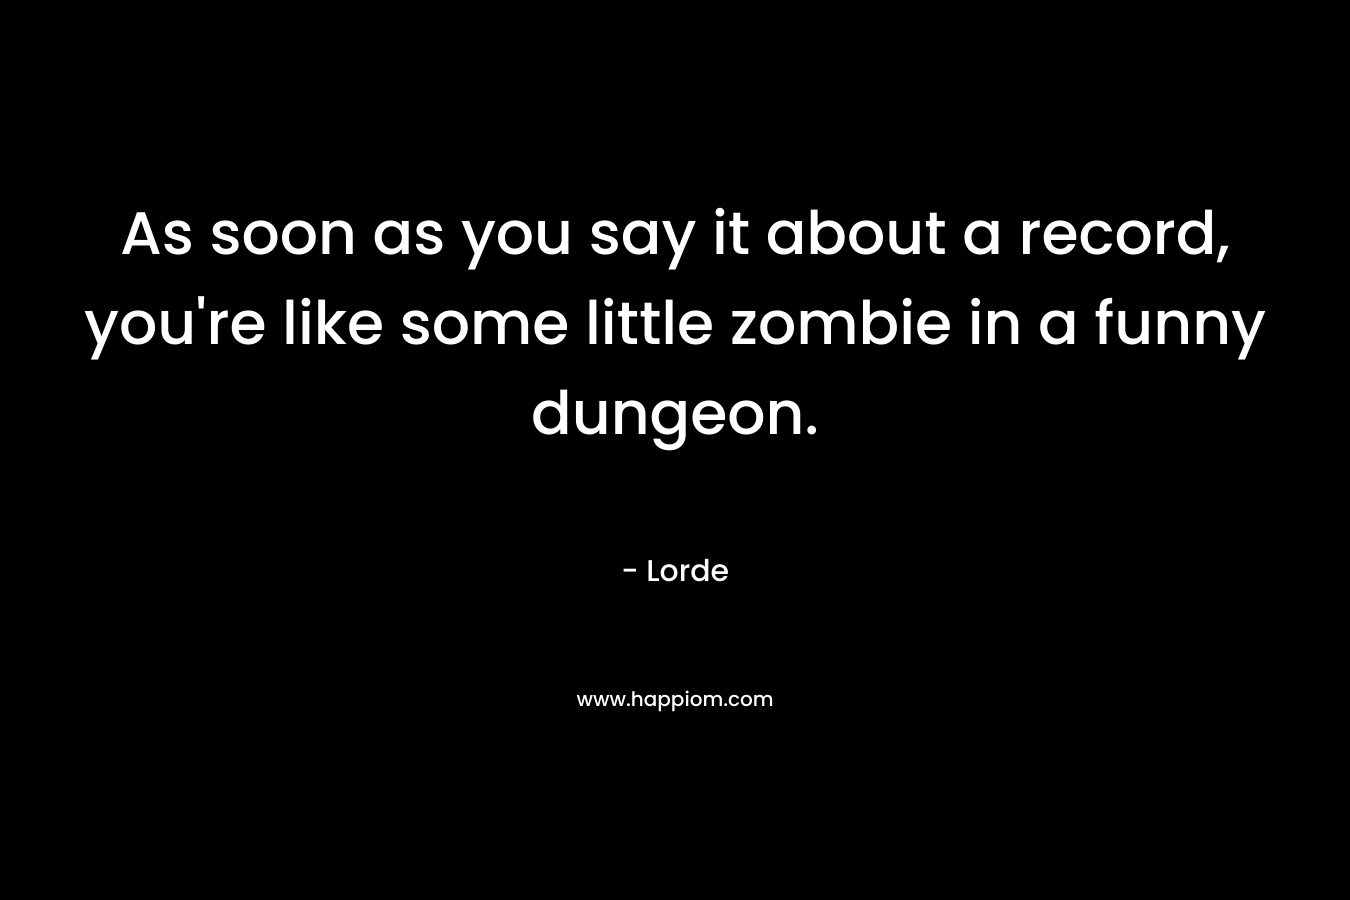 As soon as you say it about a record, you're like some little zombie in a funny dungeon.